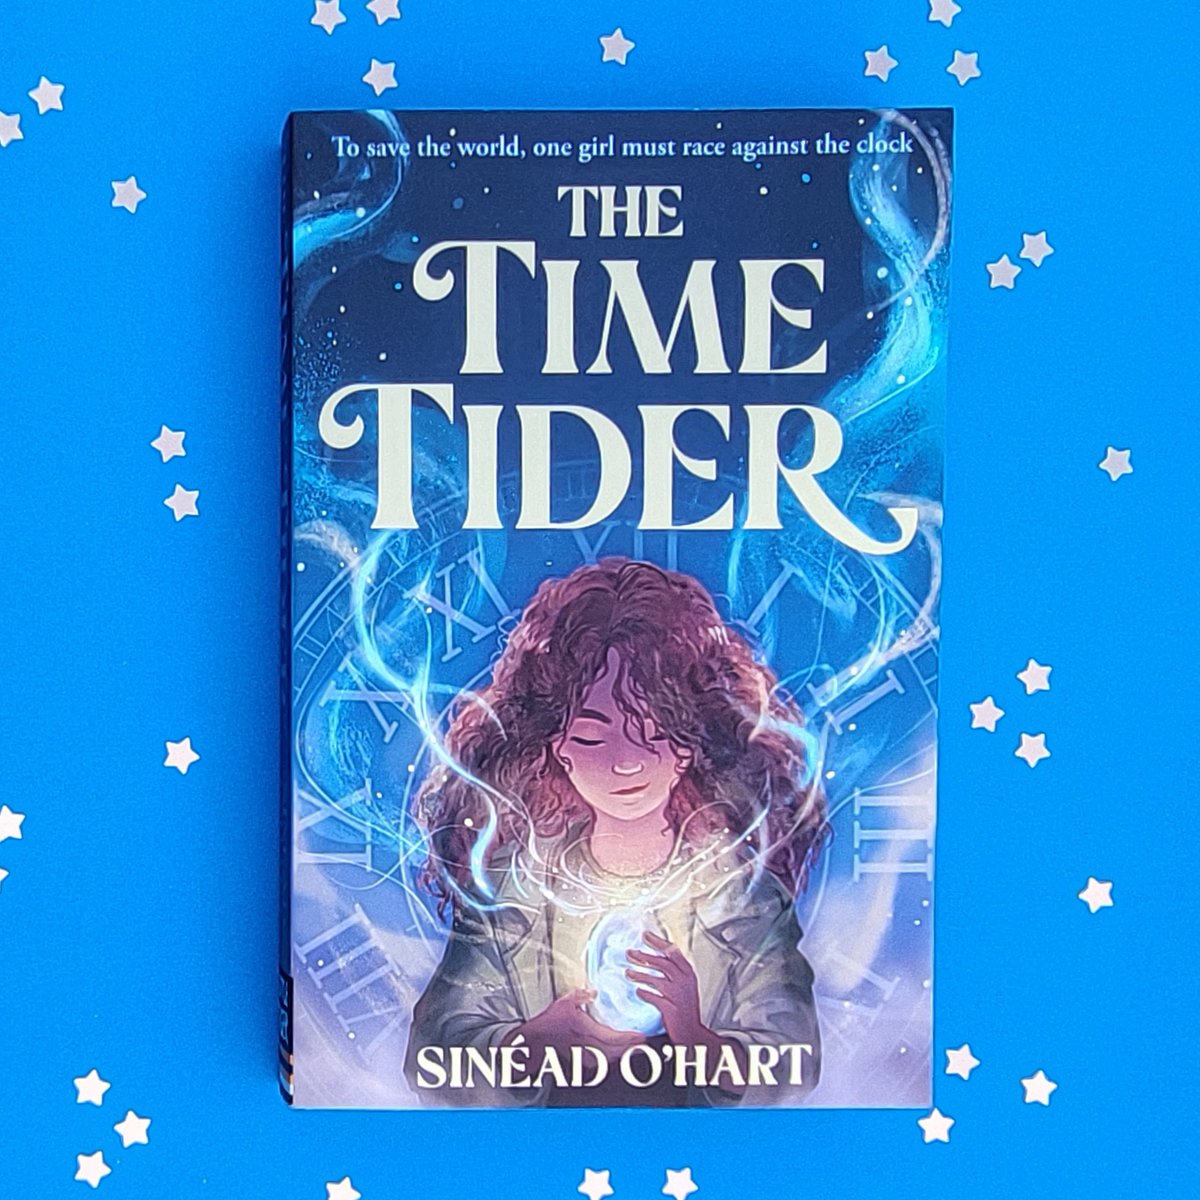 Thank you @booksirelandmag for recommending #TheTimeTider by @SJOHart to celebrate this #IrishBookWeek! ✨ 'Intricate world-building and delicate explorations of a father-daughter relationship are at the core of this story.' @rurooie 🔗bit.ly/3trKi8b #ChildrensBooks